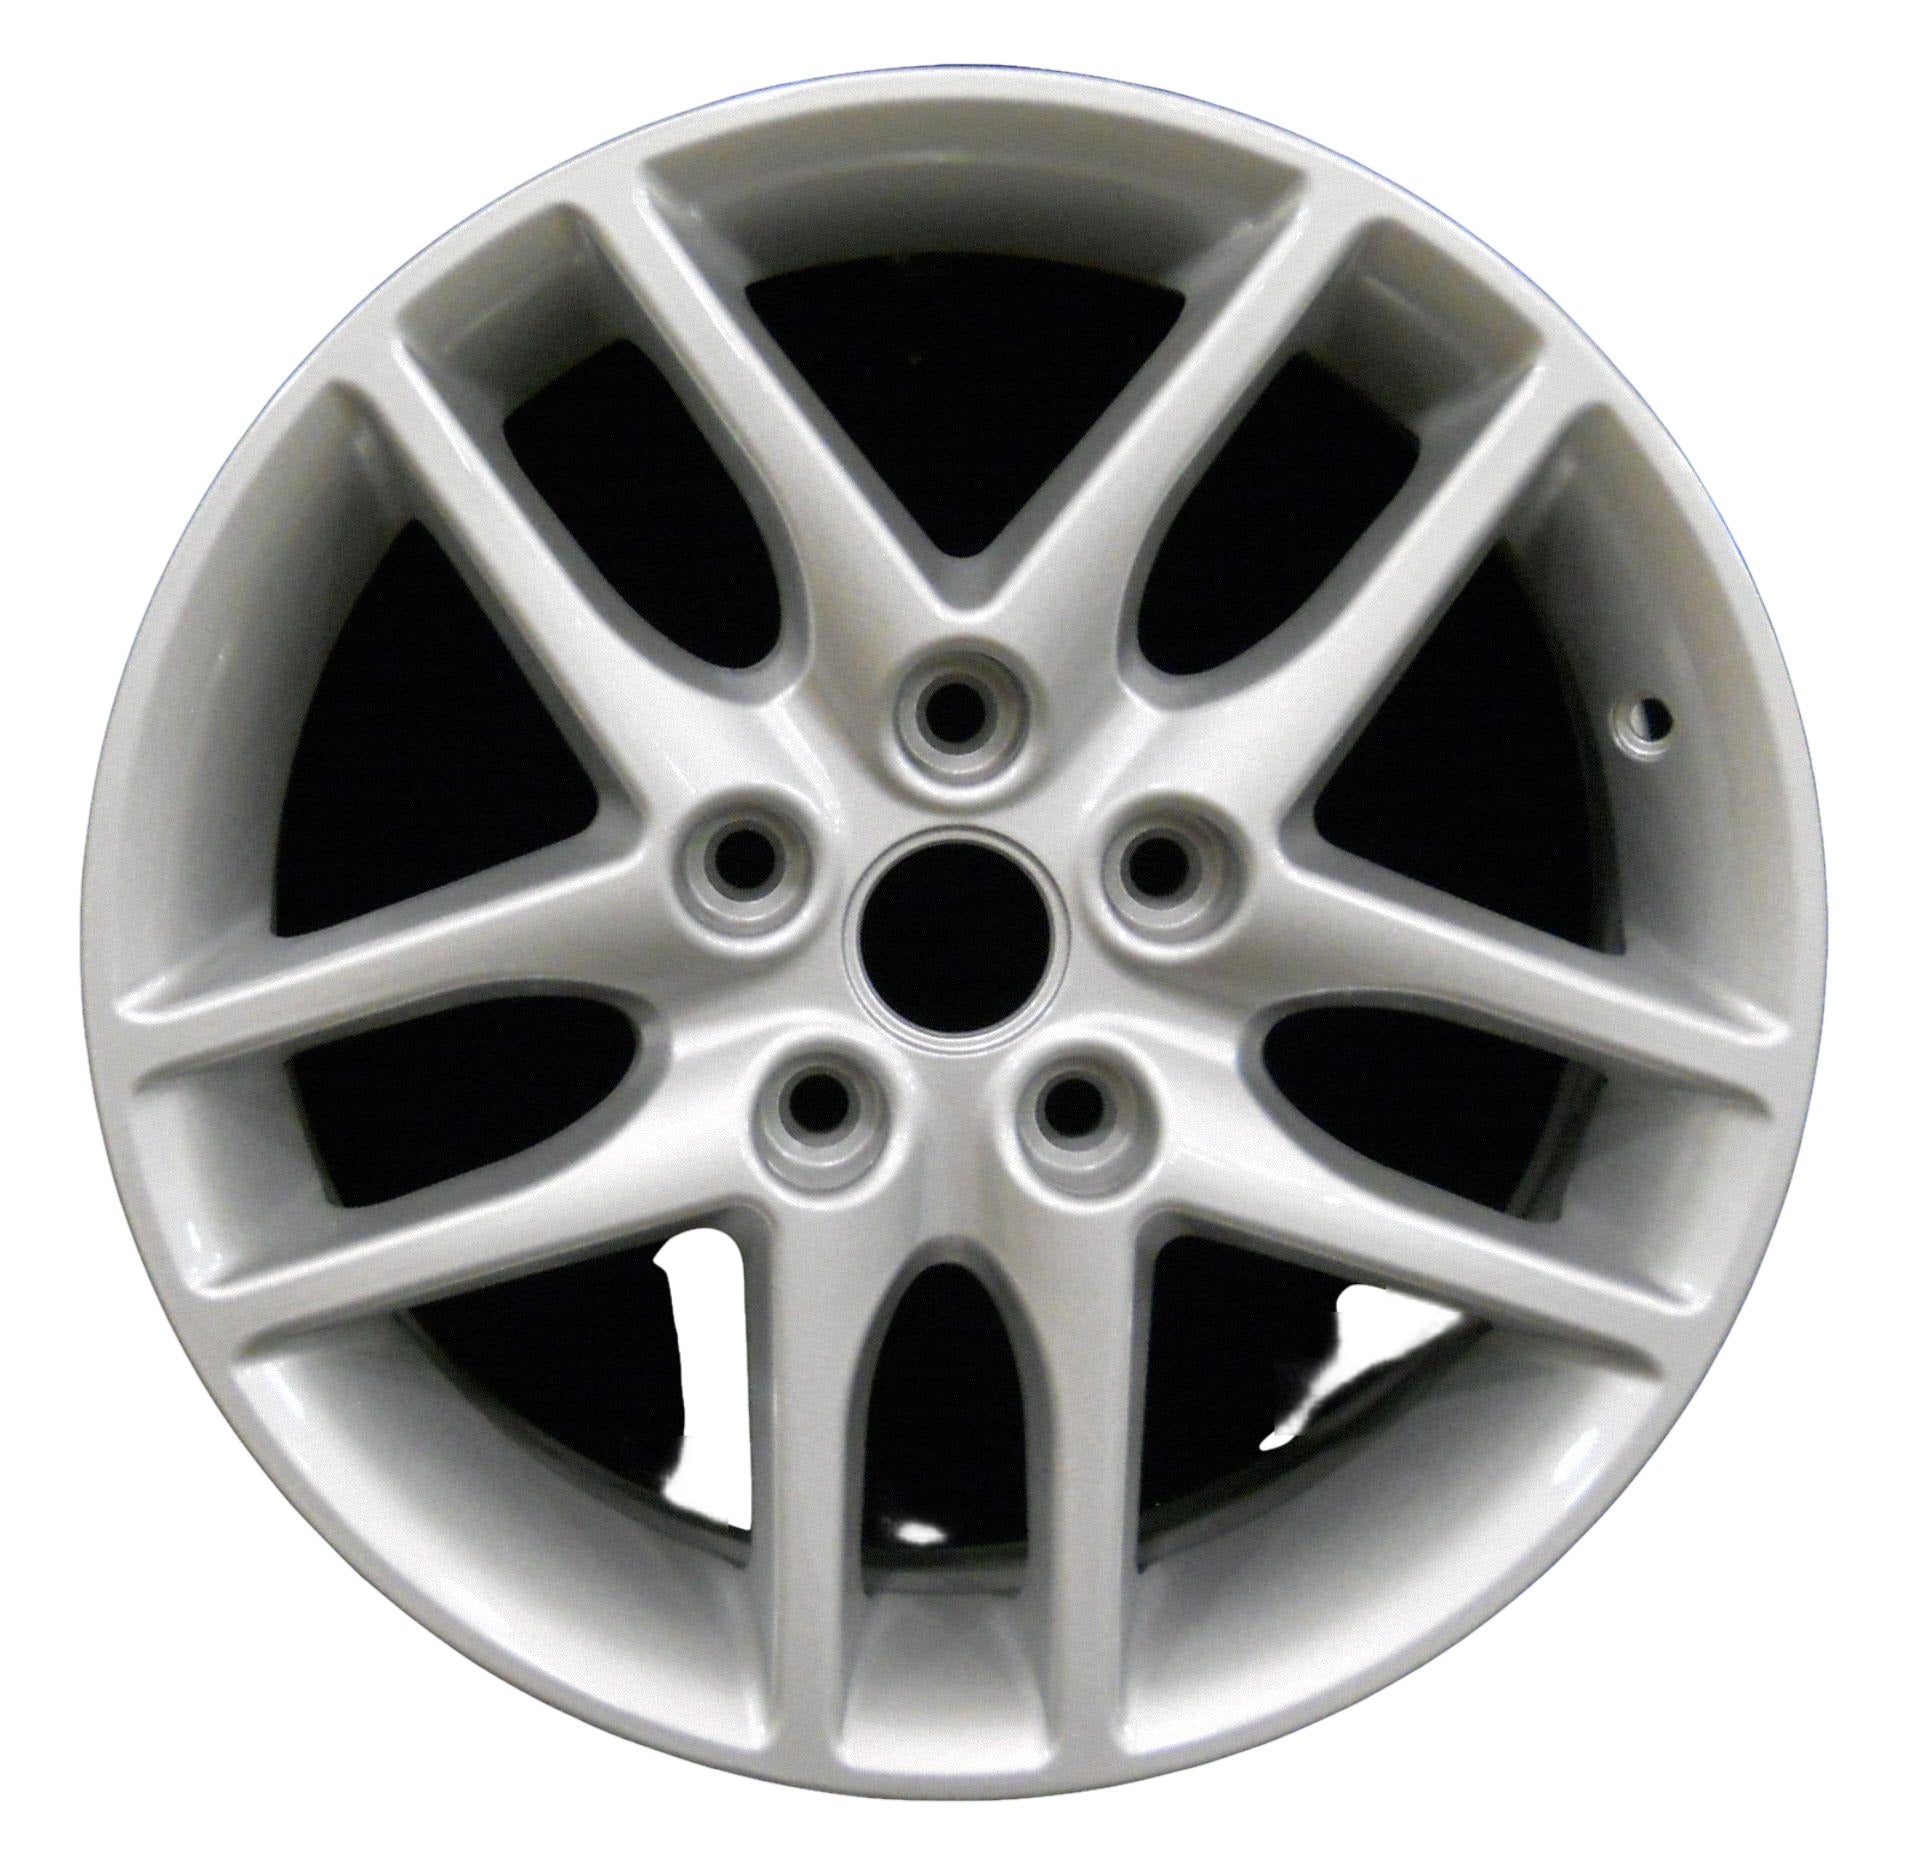 Ford Fusion  2010, 2011, 2012 Factory OEM Car Wheel Size 16x6.5 Alloy WAO.3798.PS09.FF